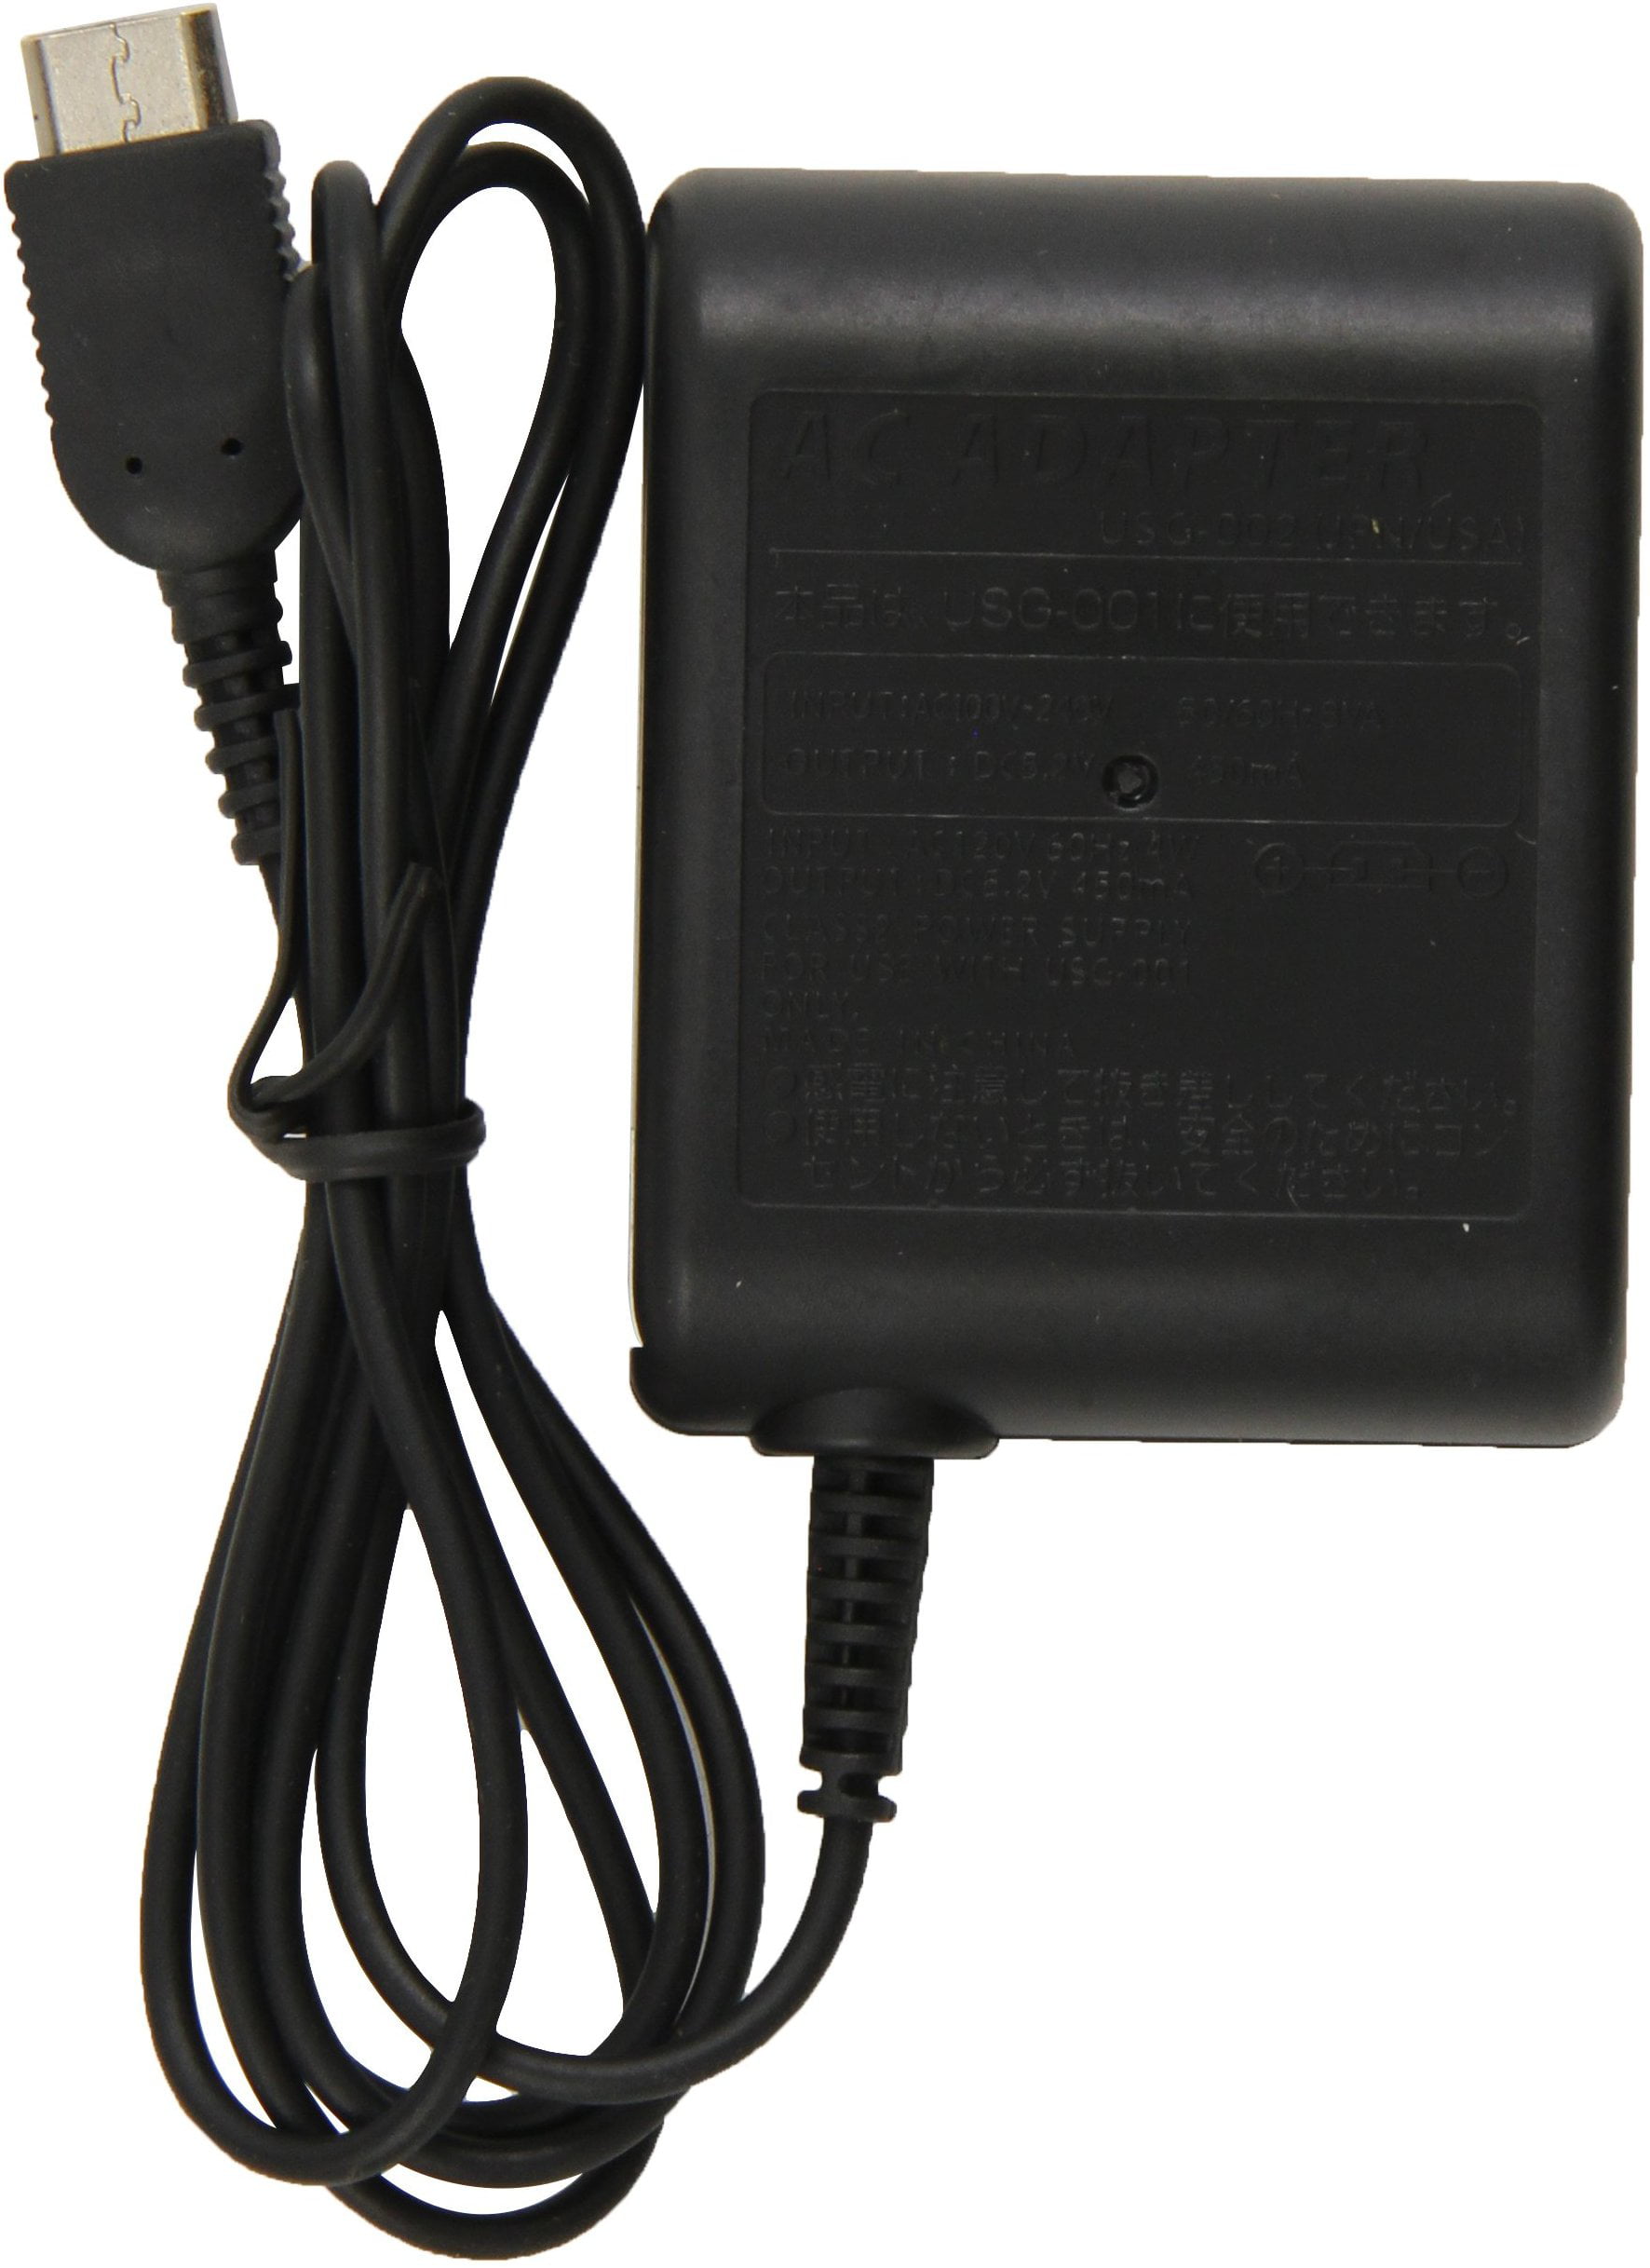 Game Boy AC Wall Charger Micro Power Adapter Walmart.com